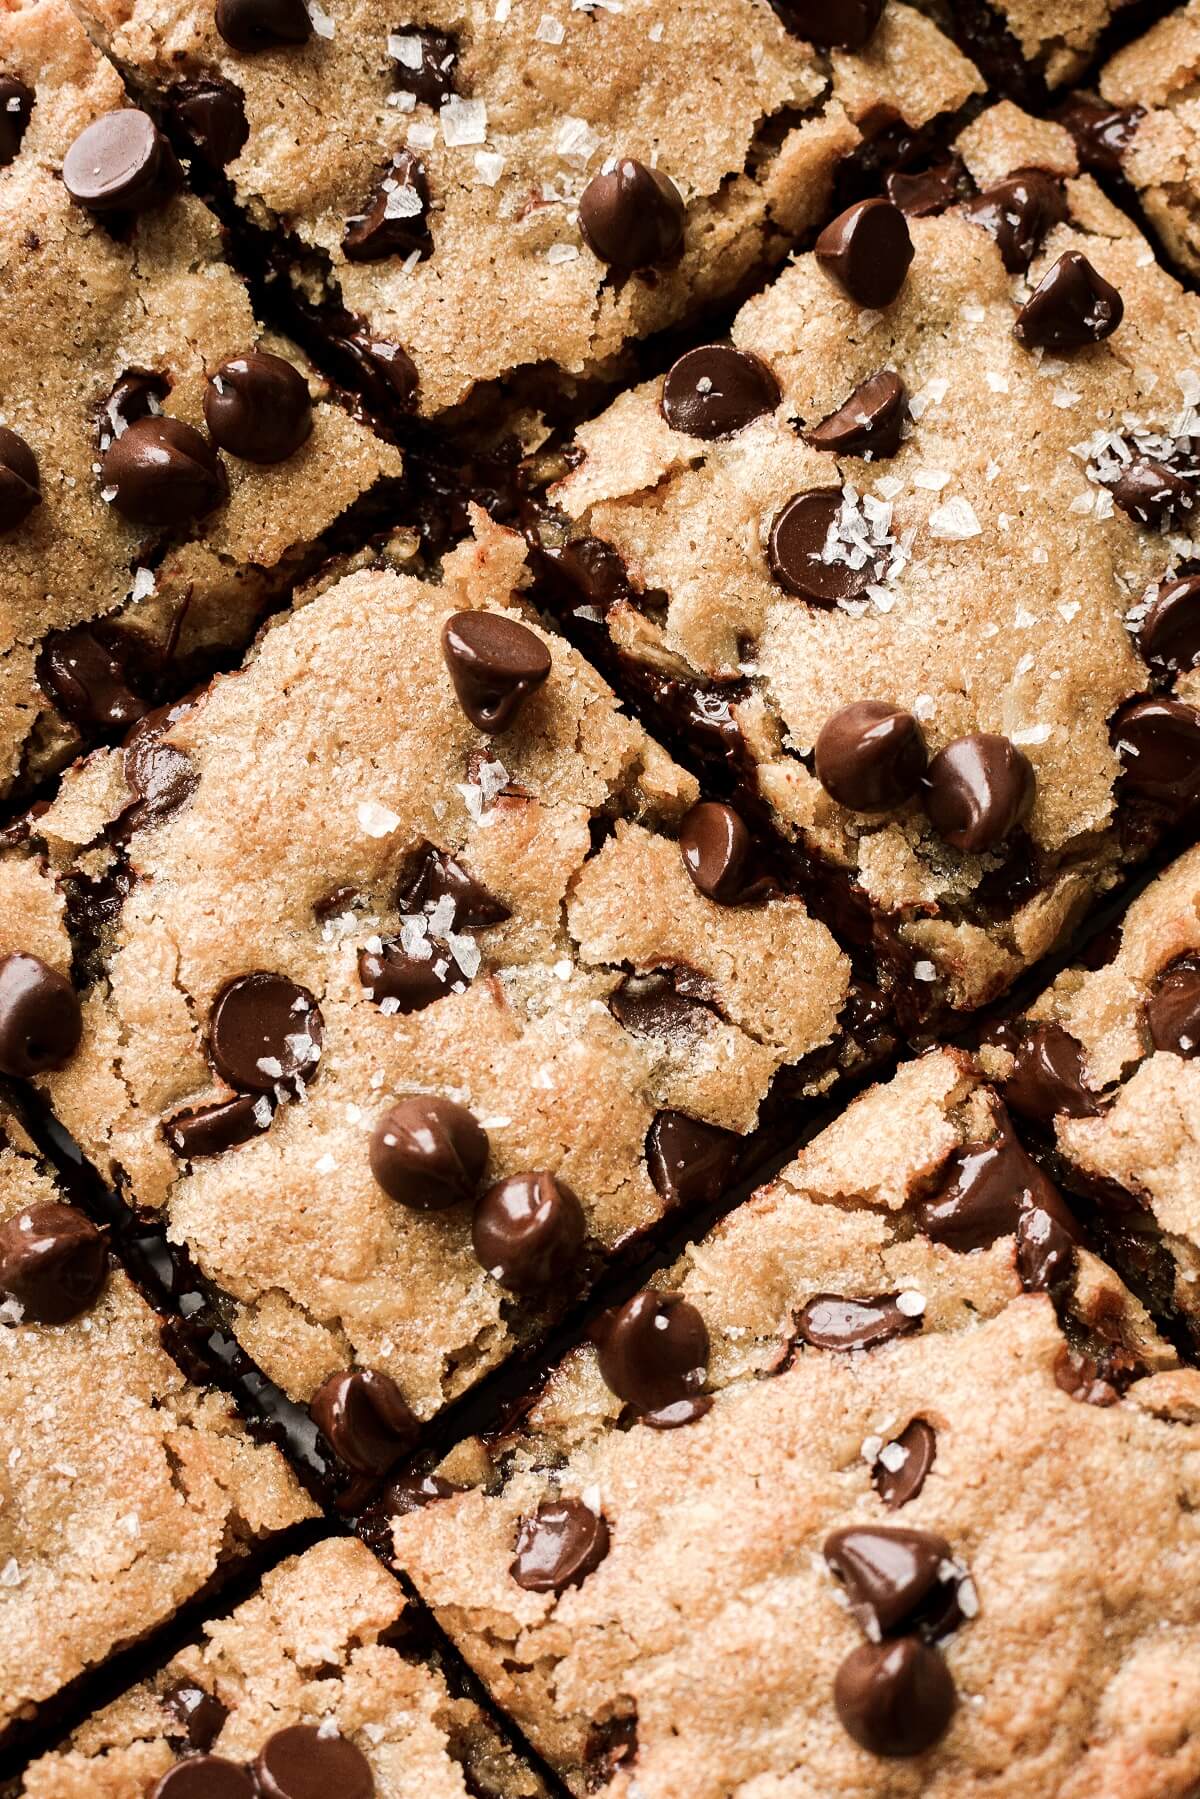 Closeup of chocolate chips and sea salt on oatmeal cookie bars.